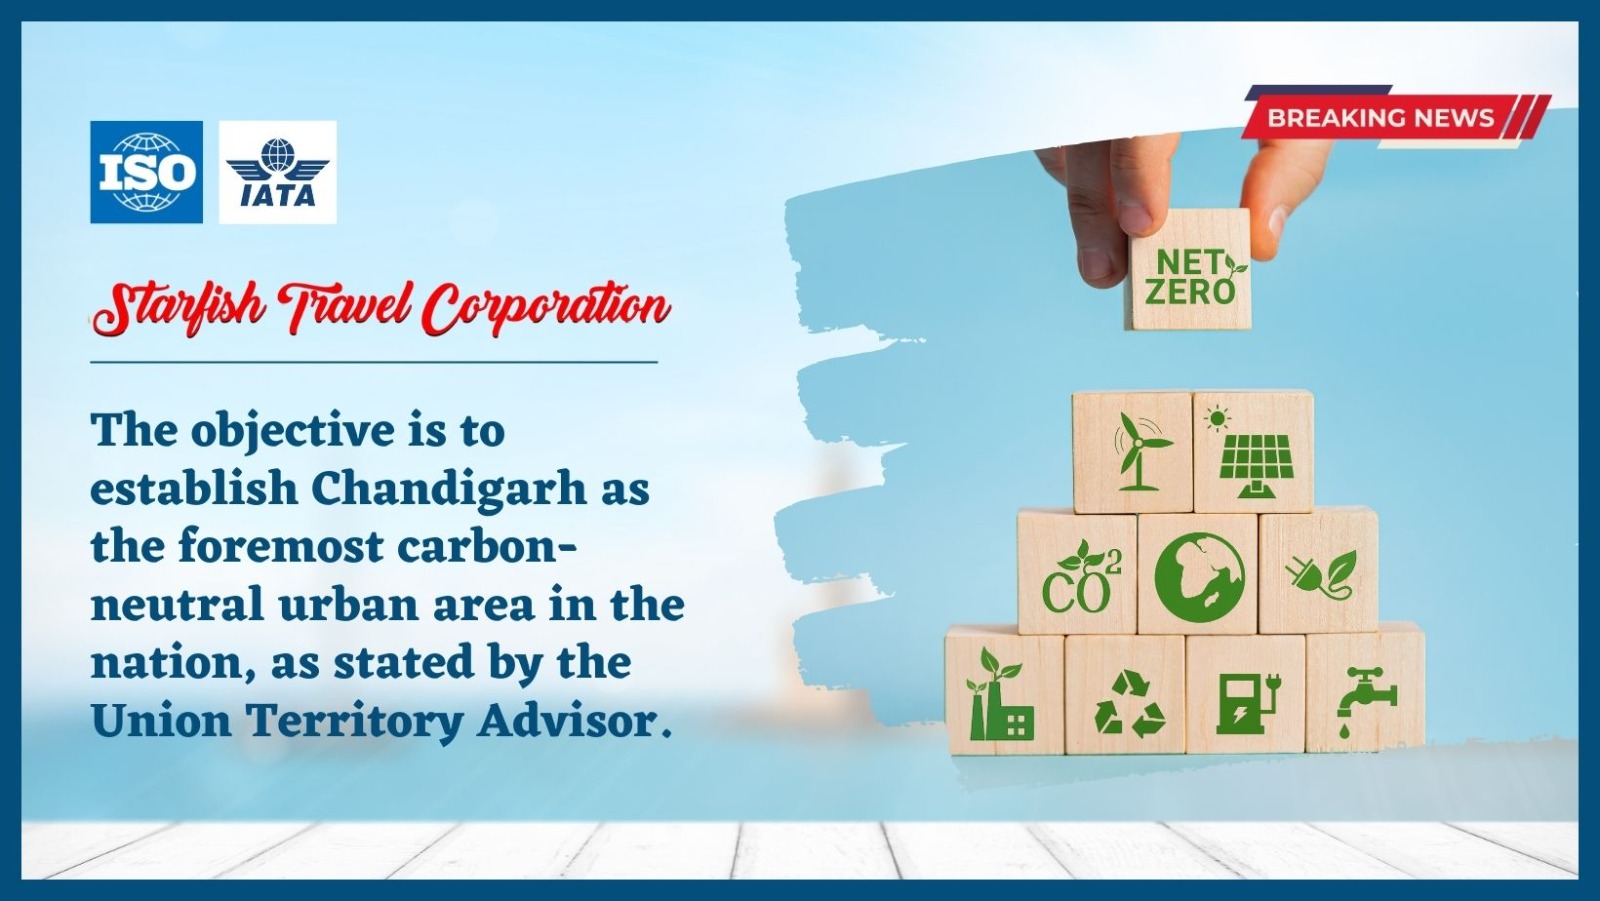 The objective is to establish Chandigarh as the foremost carbon-neutral urban area in the nation, as stated by the Union Territory Advisor.